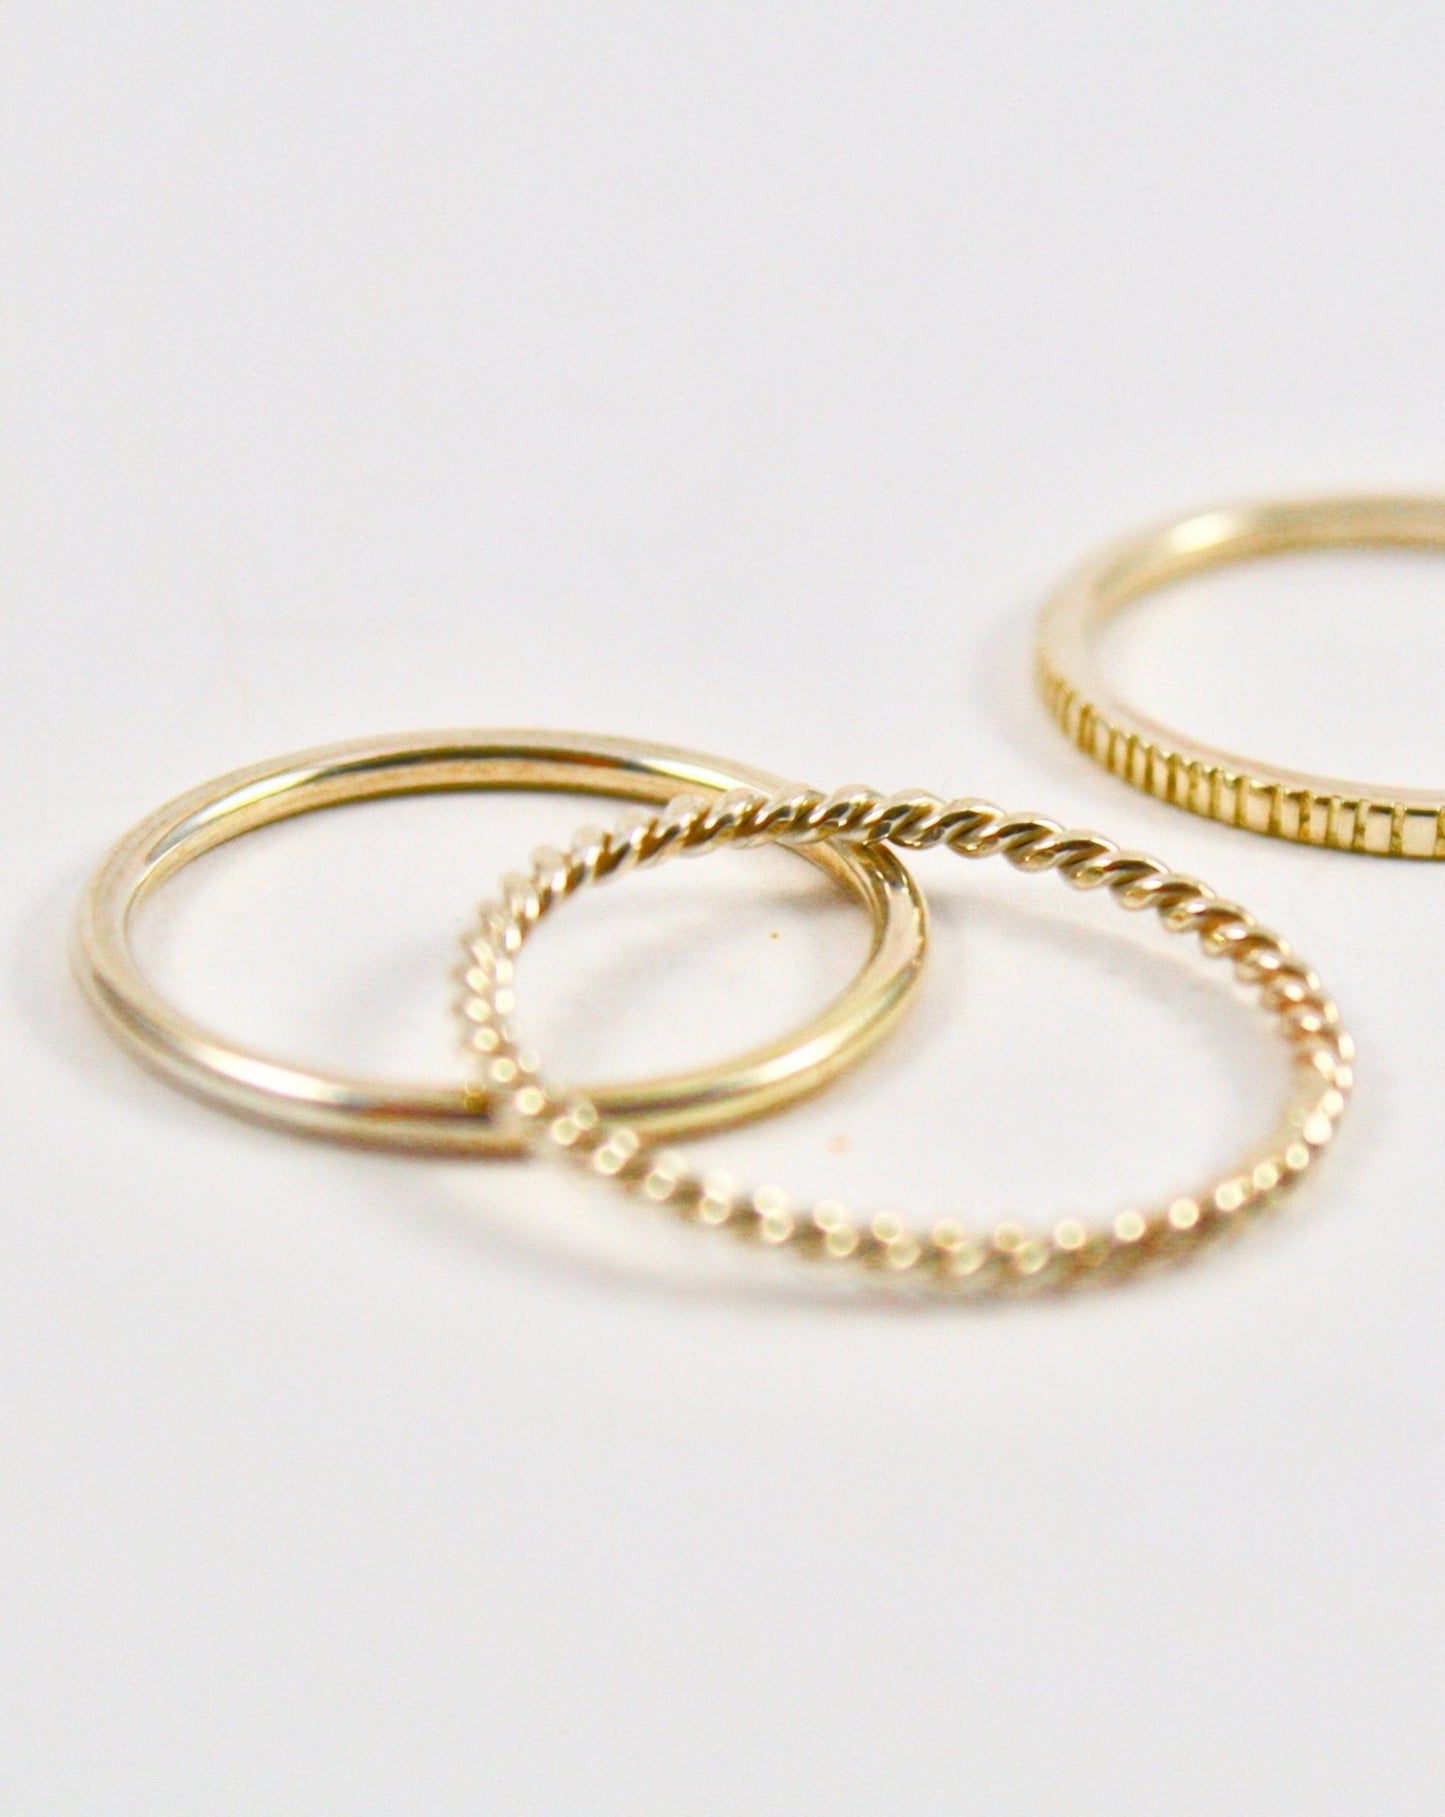 Three 9ct gold stacking rings from jade Rabbit jewellery